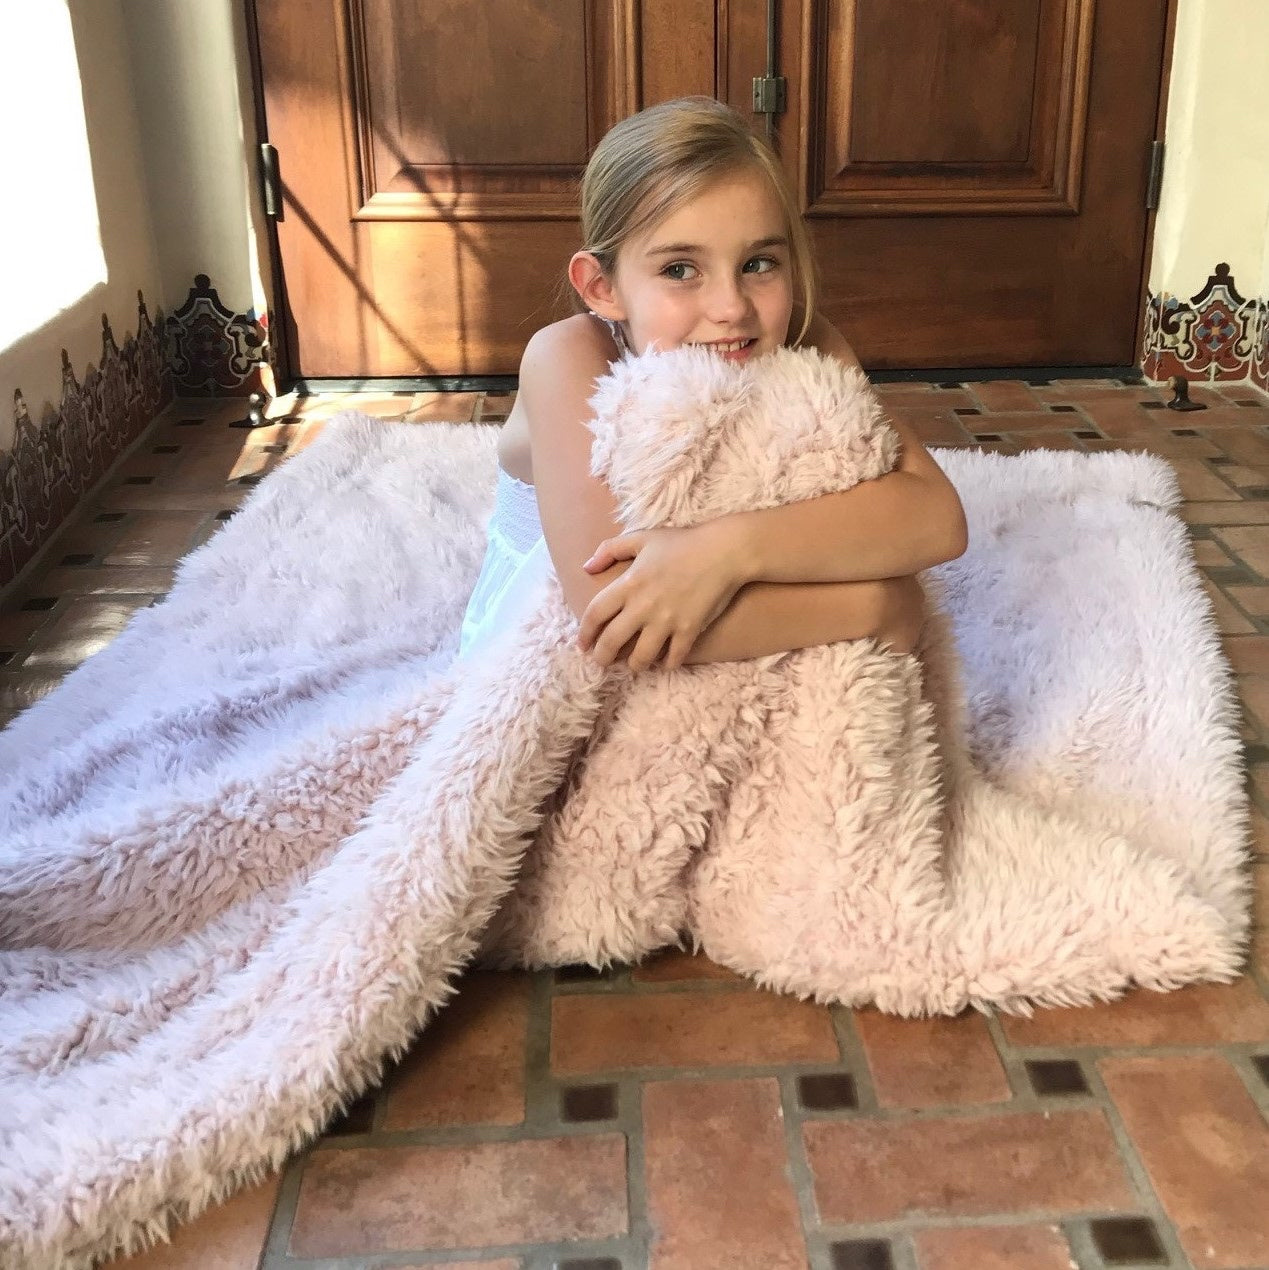 Young girl sitting on floor with BIG LOViE Angel Plush Big blanket wrapped around her.